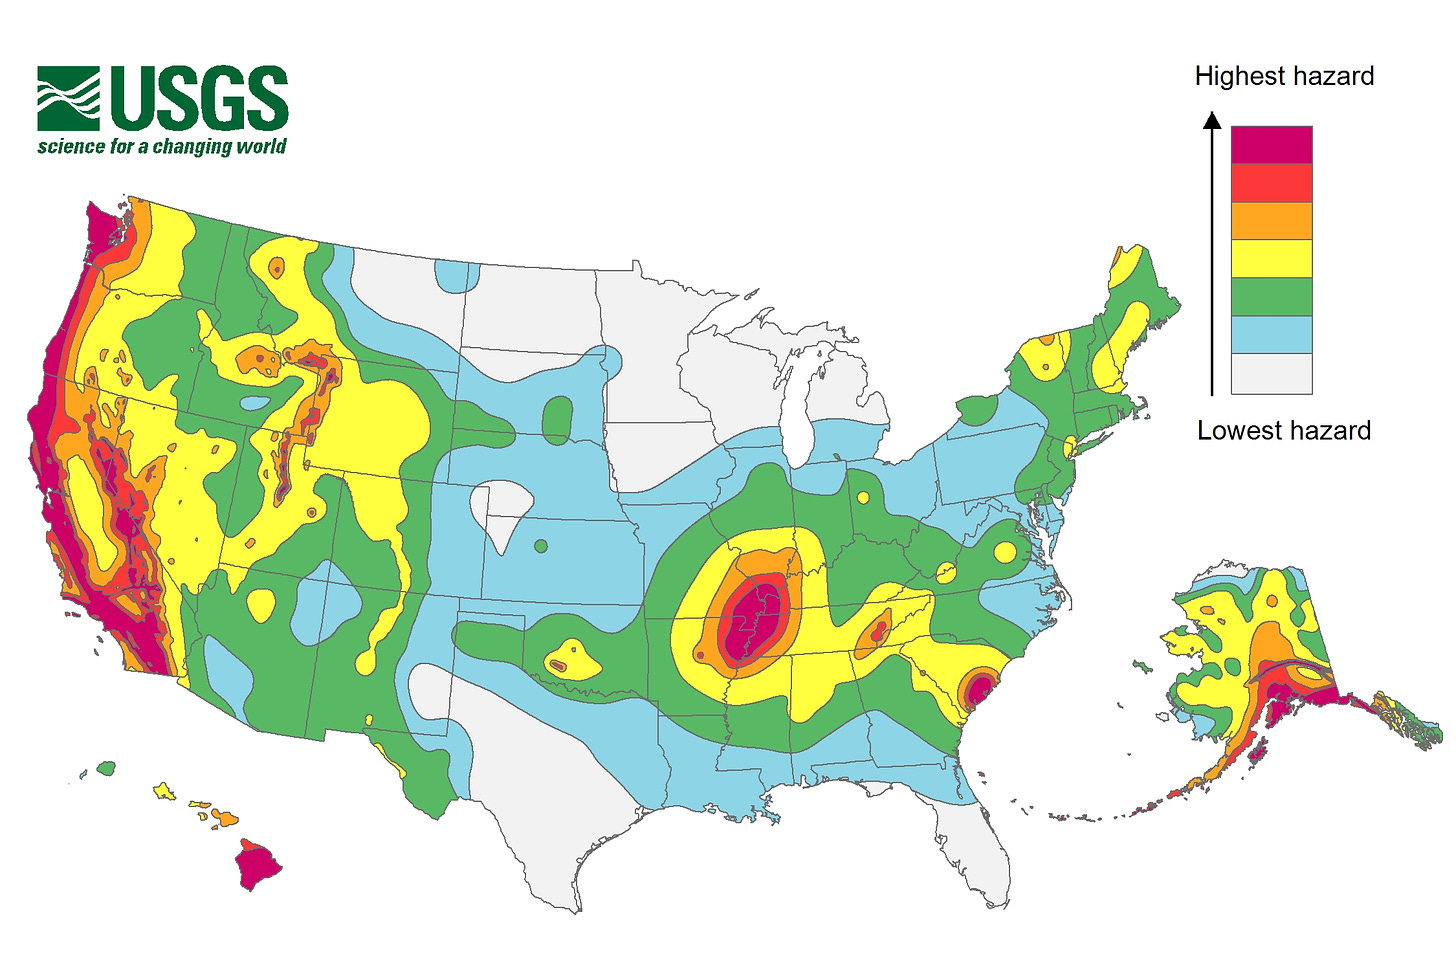 Earthquake hazard map from the USGS showing hotspots in the eastern US